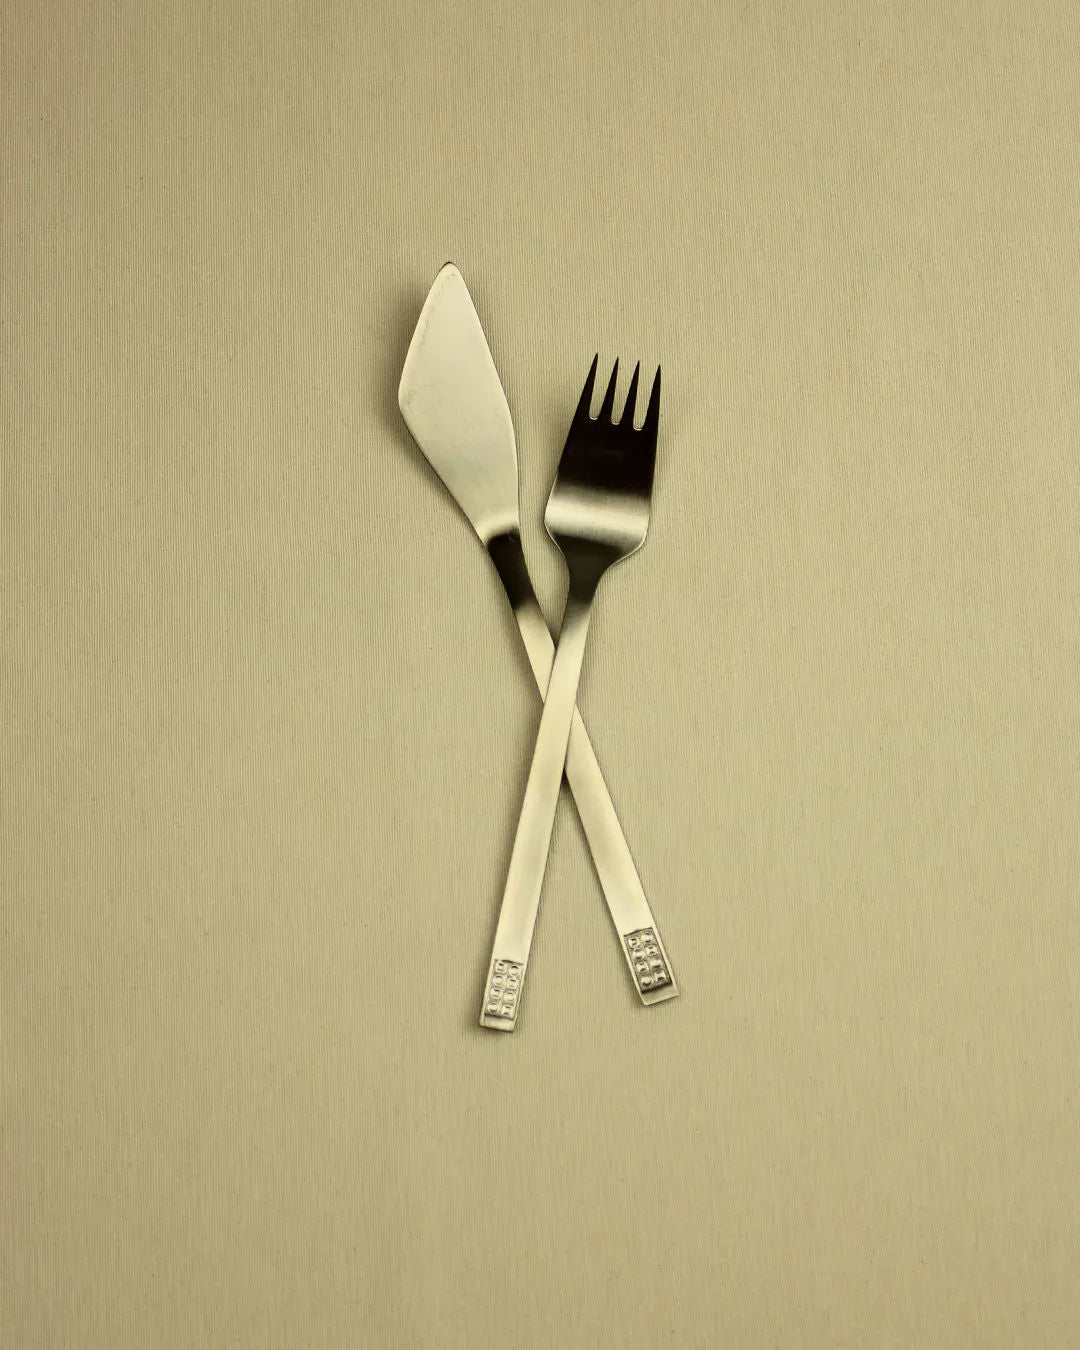 A silver Boga Avante Shop German fish Cutlery Set 70s Style fork and knife crossed over each other on a plain beige background.